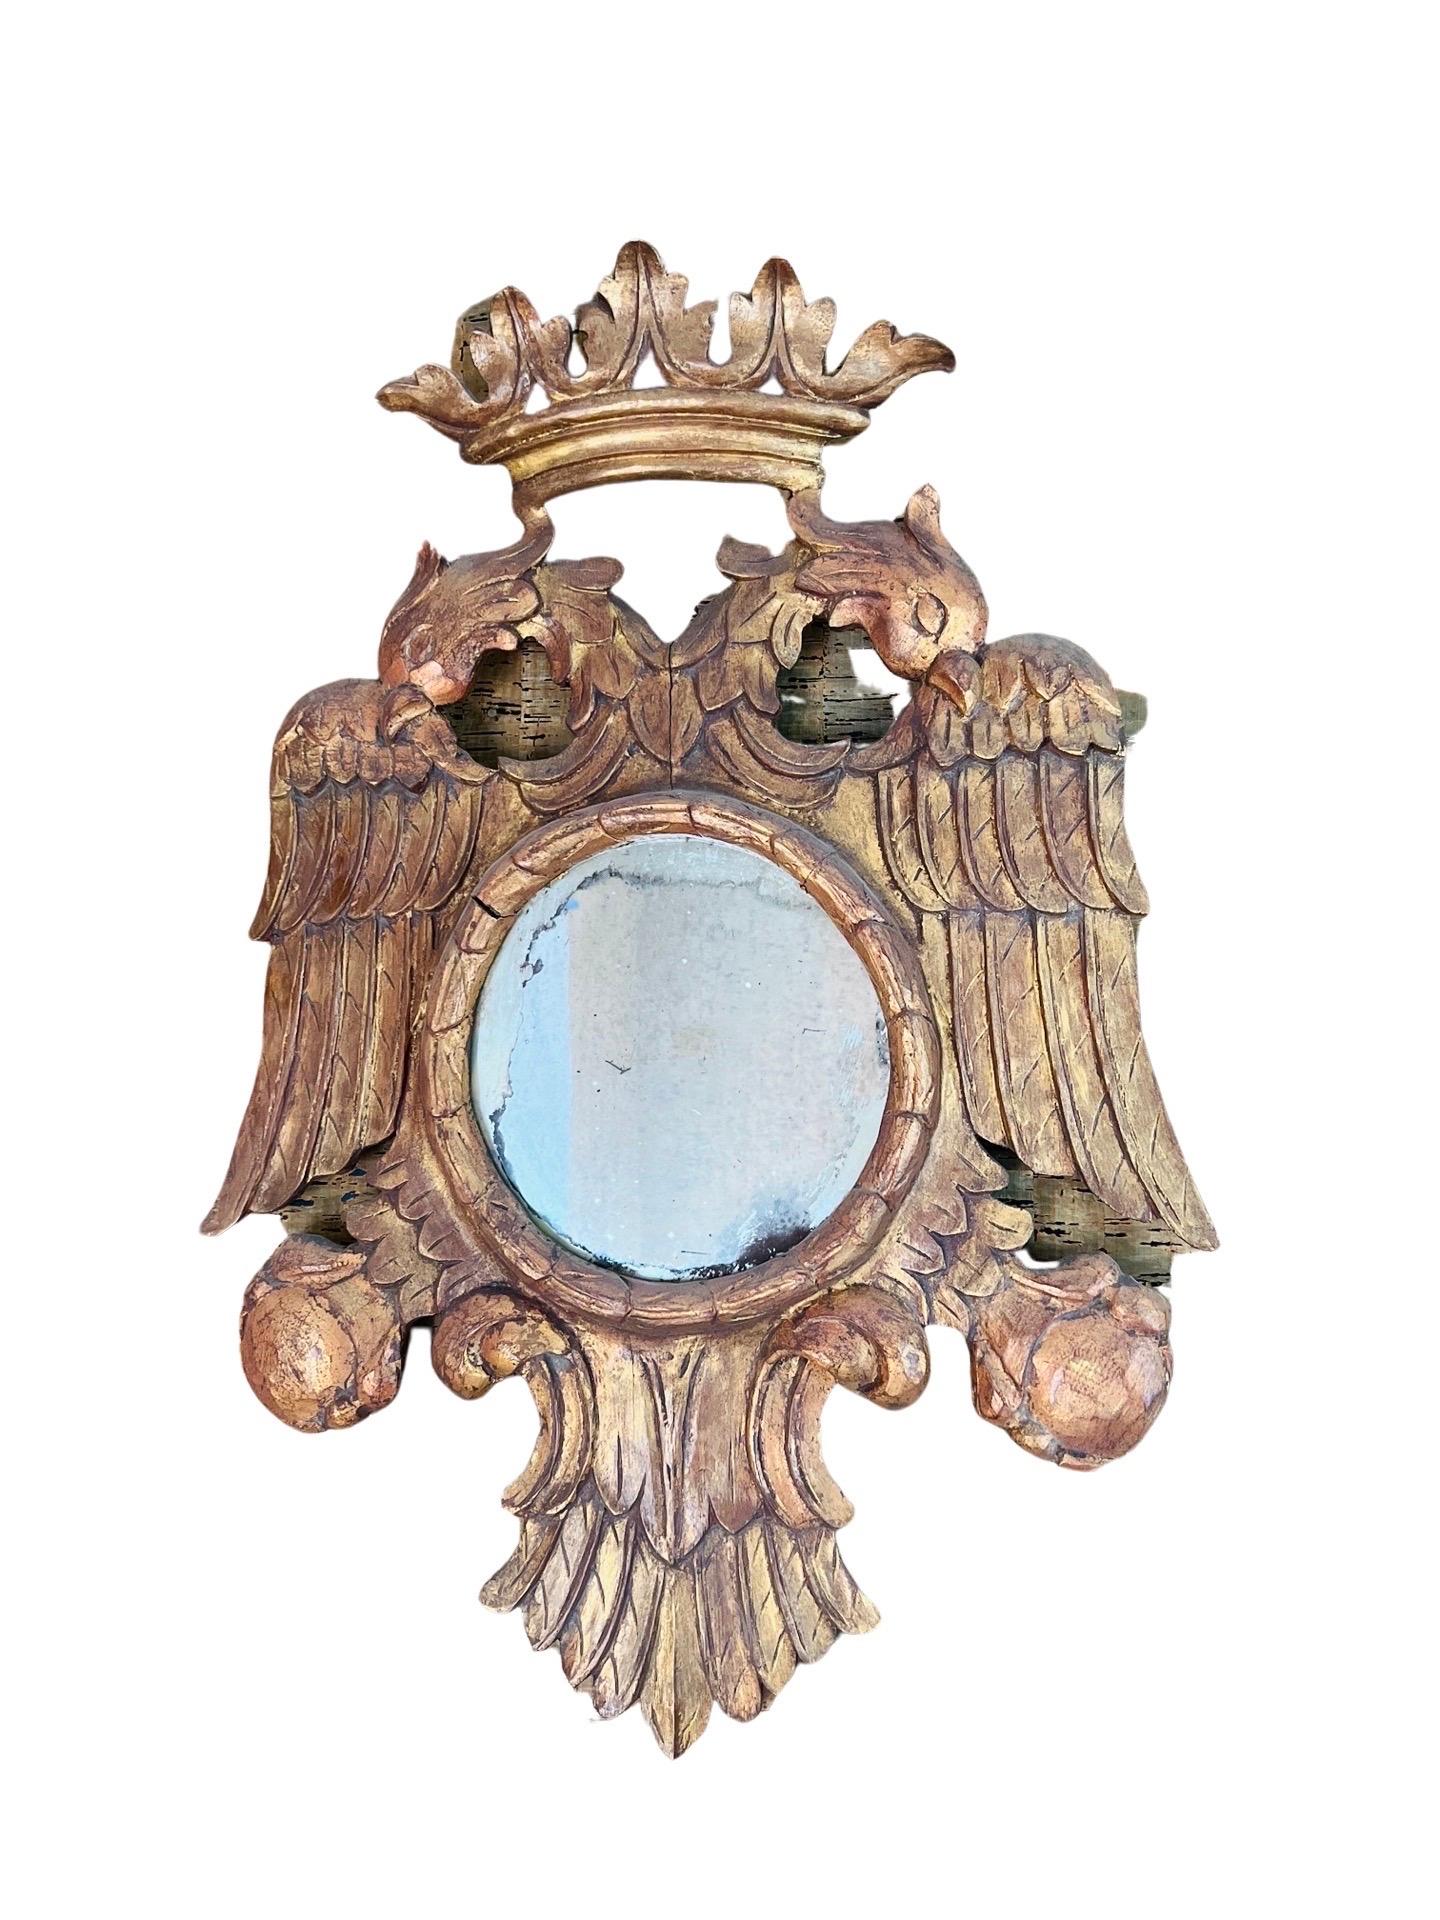 Italian made magnificent carved giltwood mirror frame in the form of a crowned bicephal eagle. Highly decorative frames with double-headed eagles surmounted by a crown, symmetric wings and tails holding the central circular mirror and the bird claws